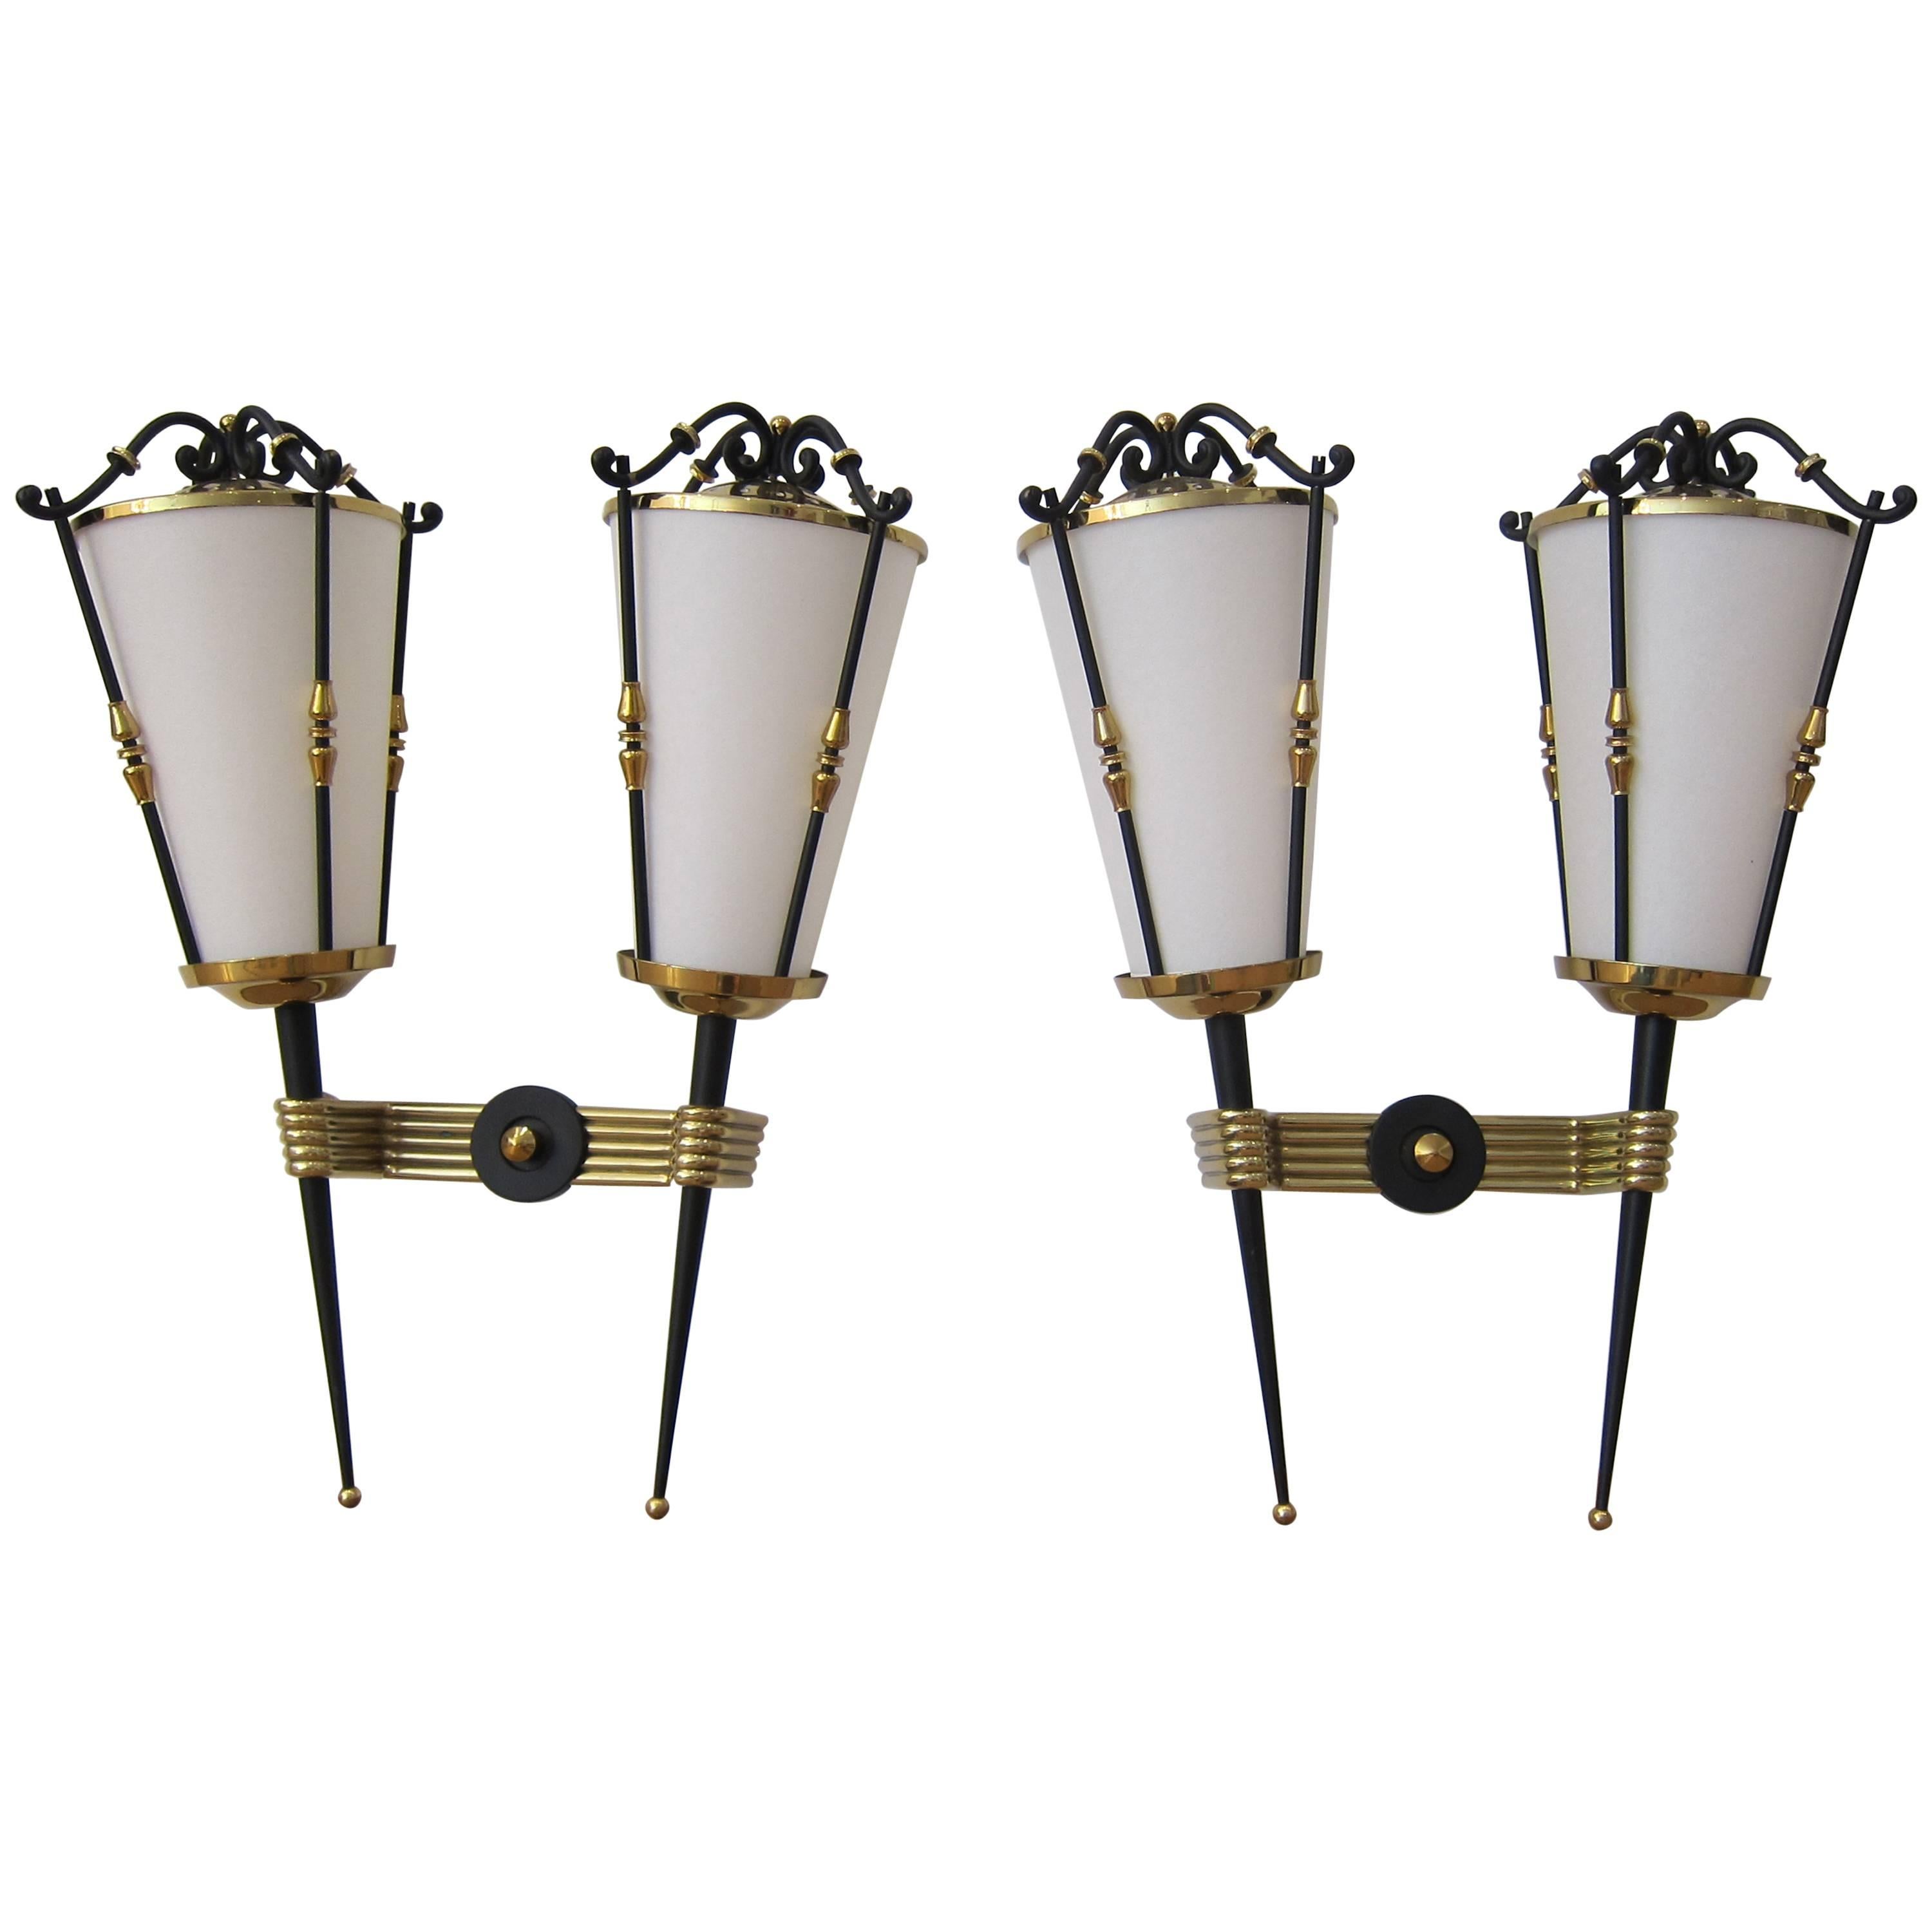 Pair of Lantern Wall Sconces by Arlus France 1950